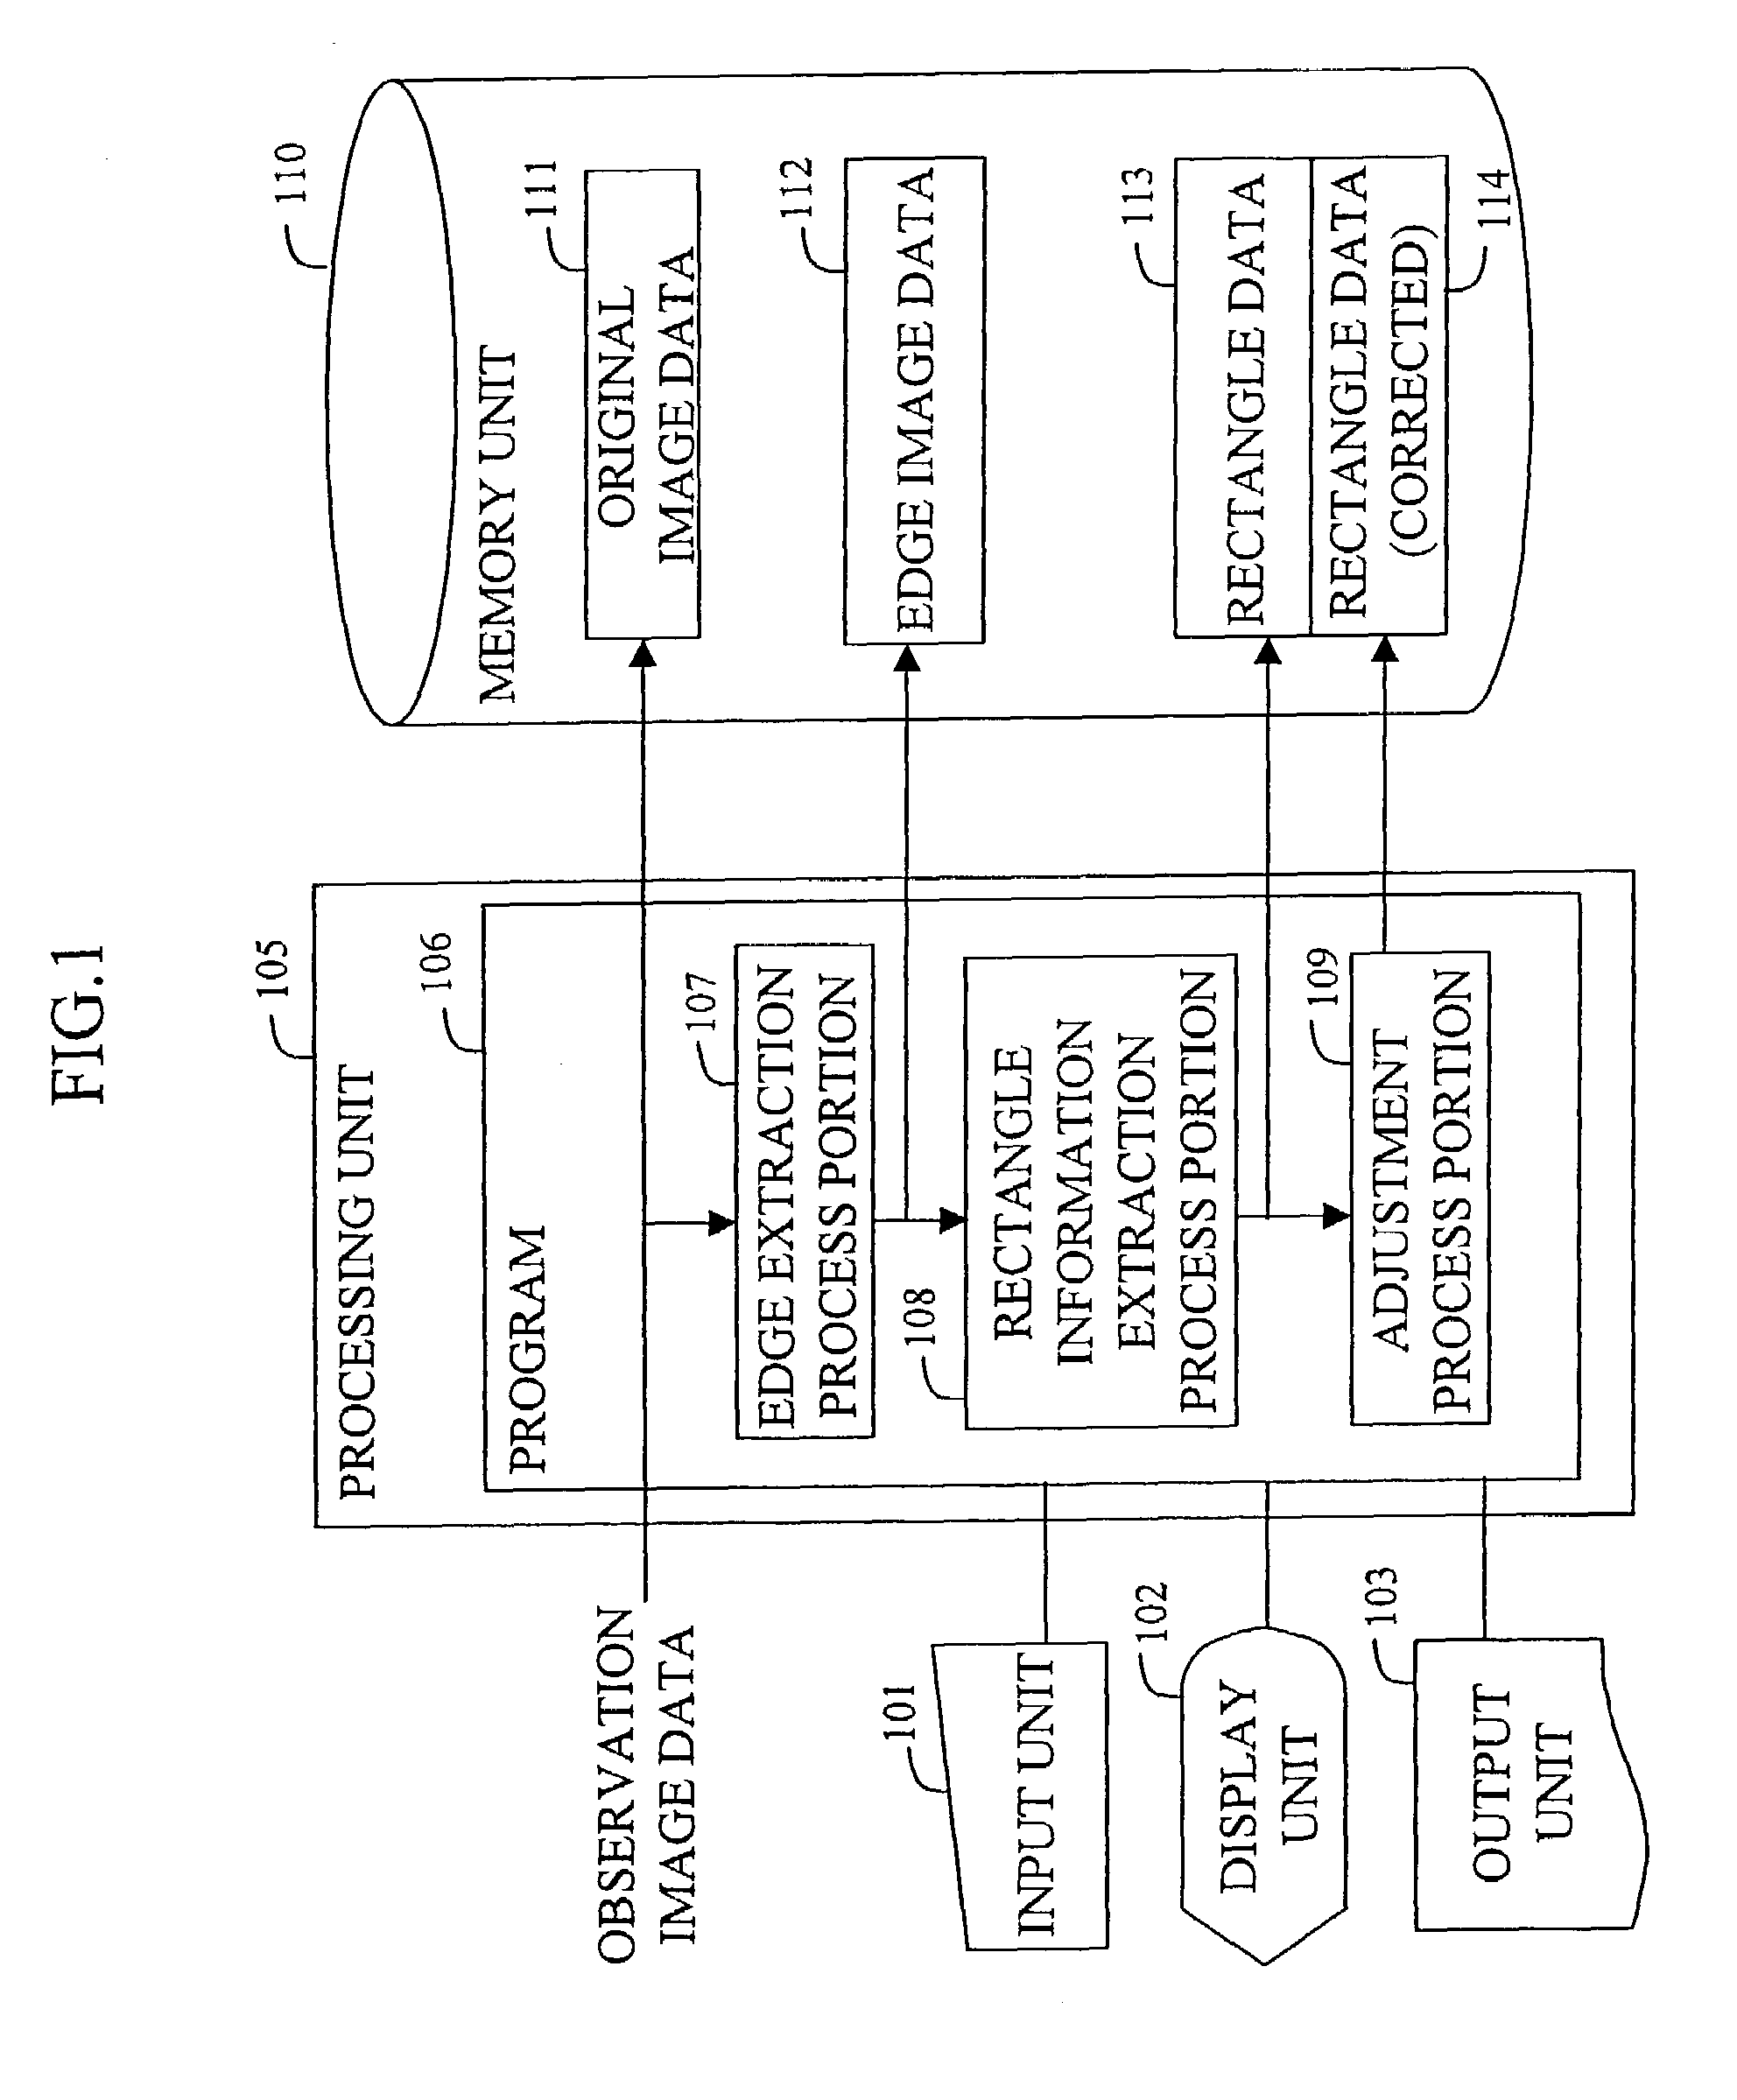 Land partition data generating method and apparatus